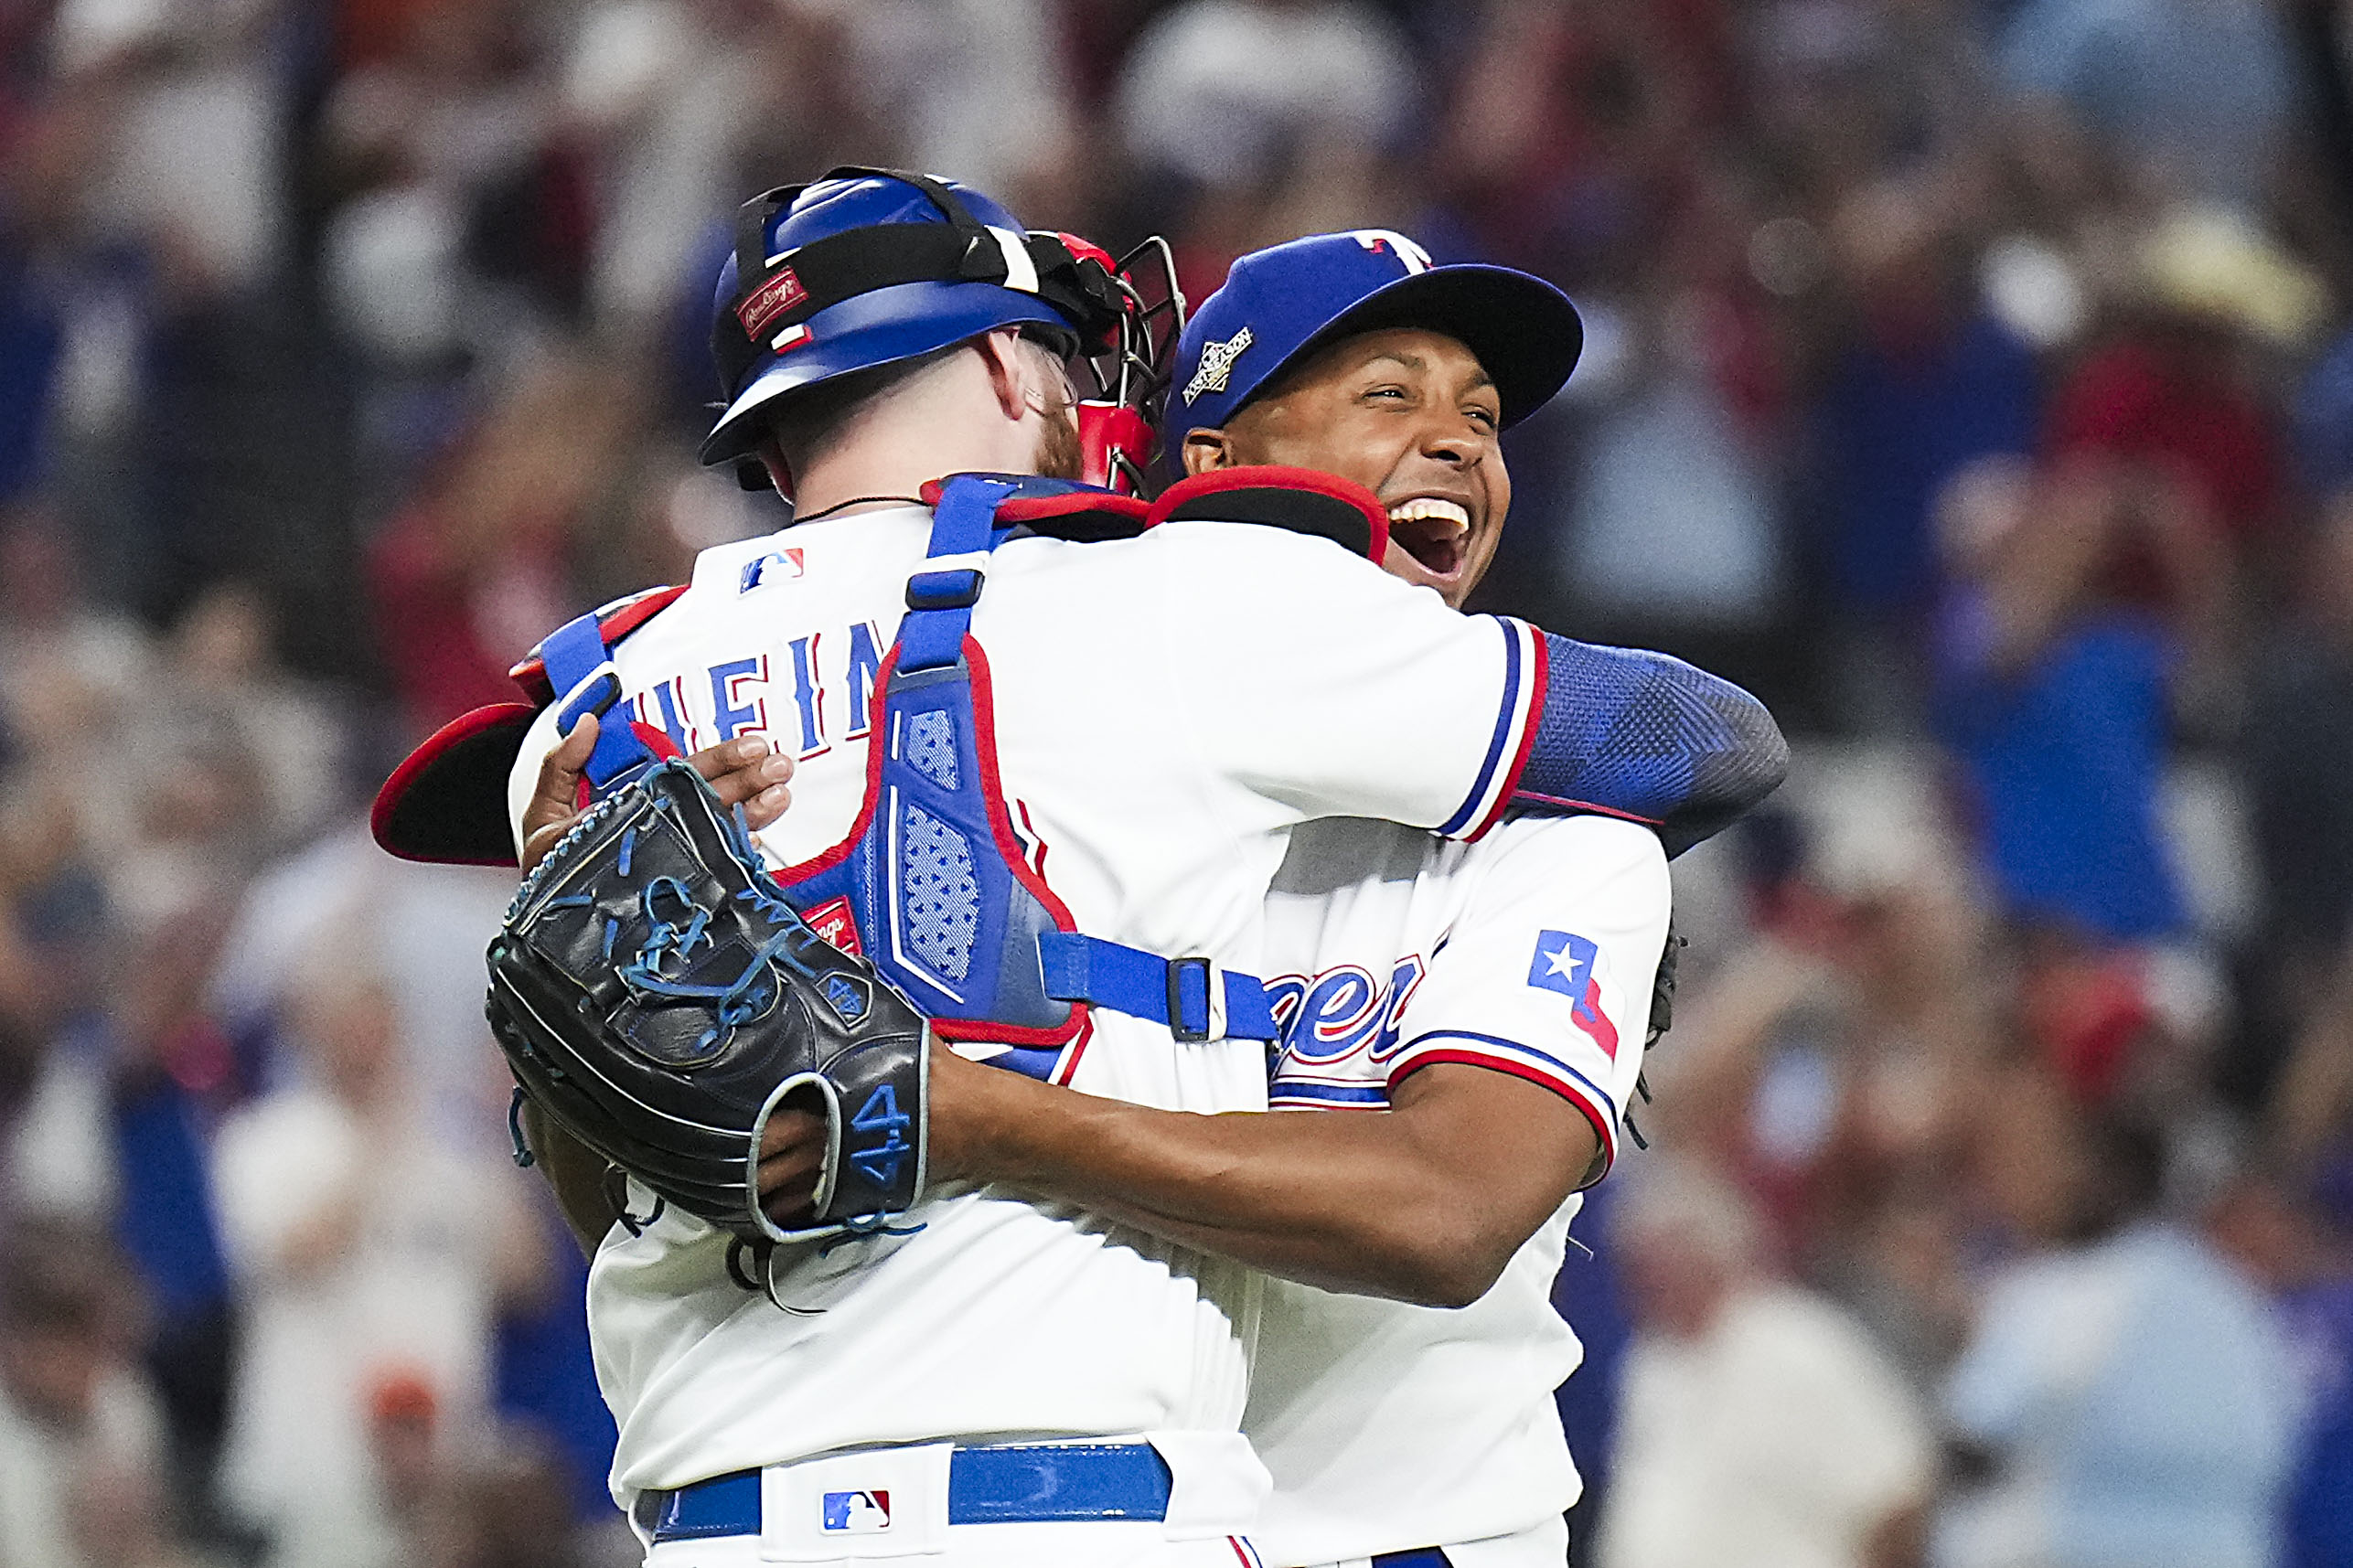 Why Rangers being four wins from World Series doesn't surprise